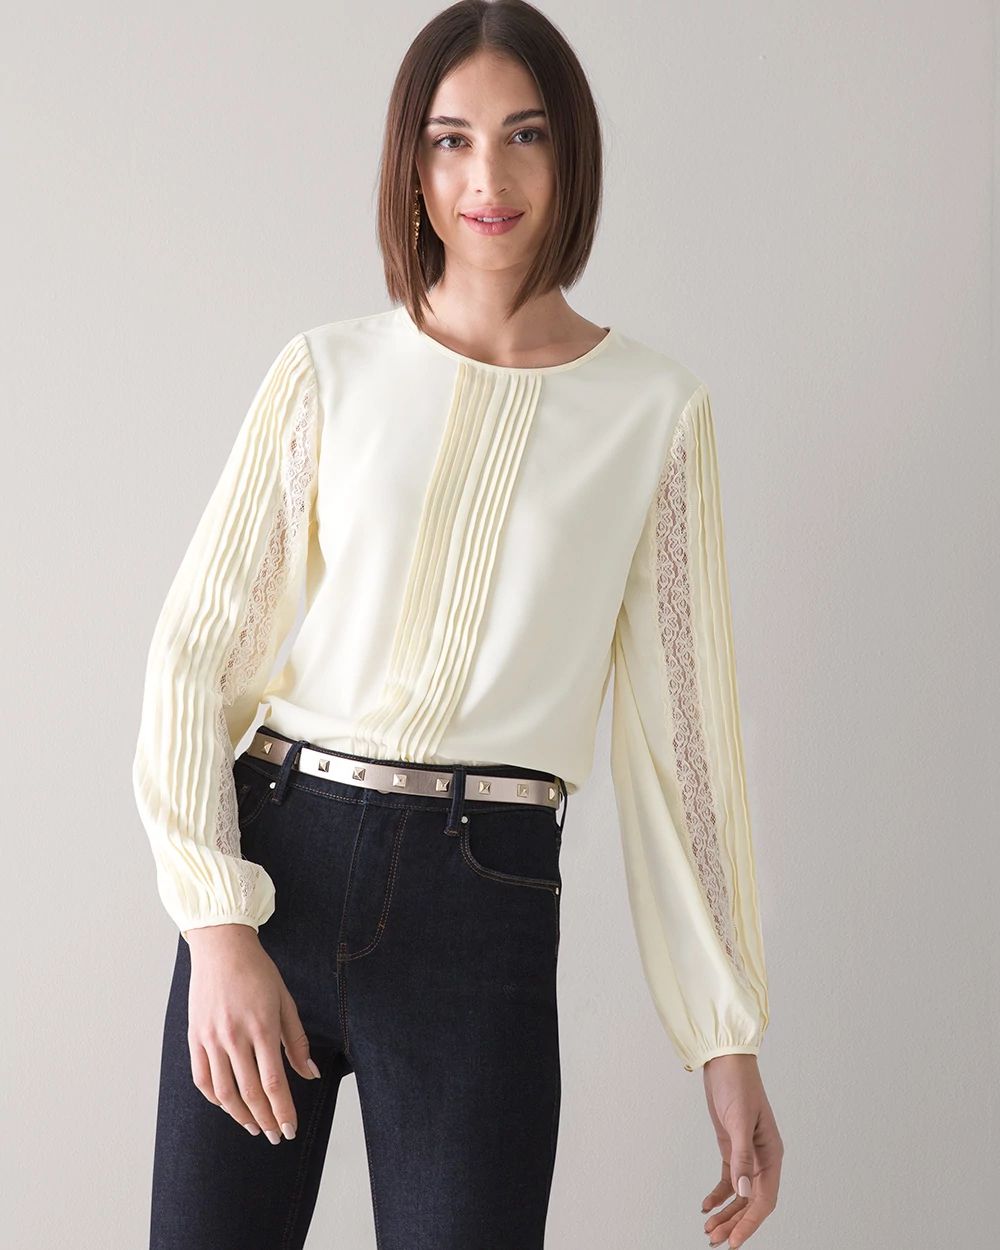 Pintuck Lace Trim Blouse click to view larger image.